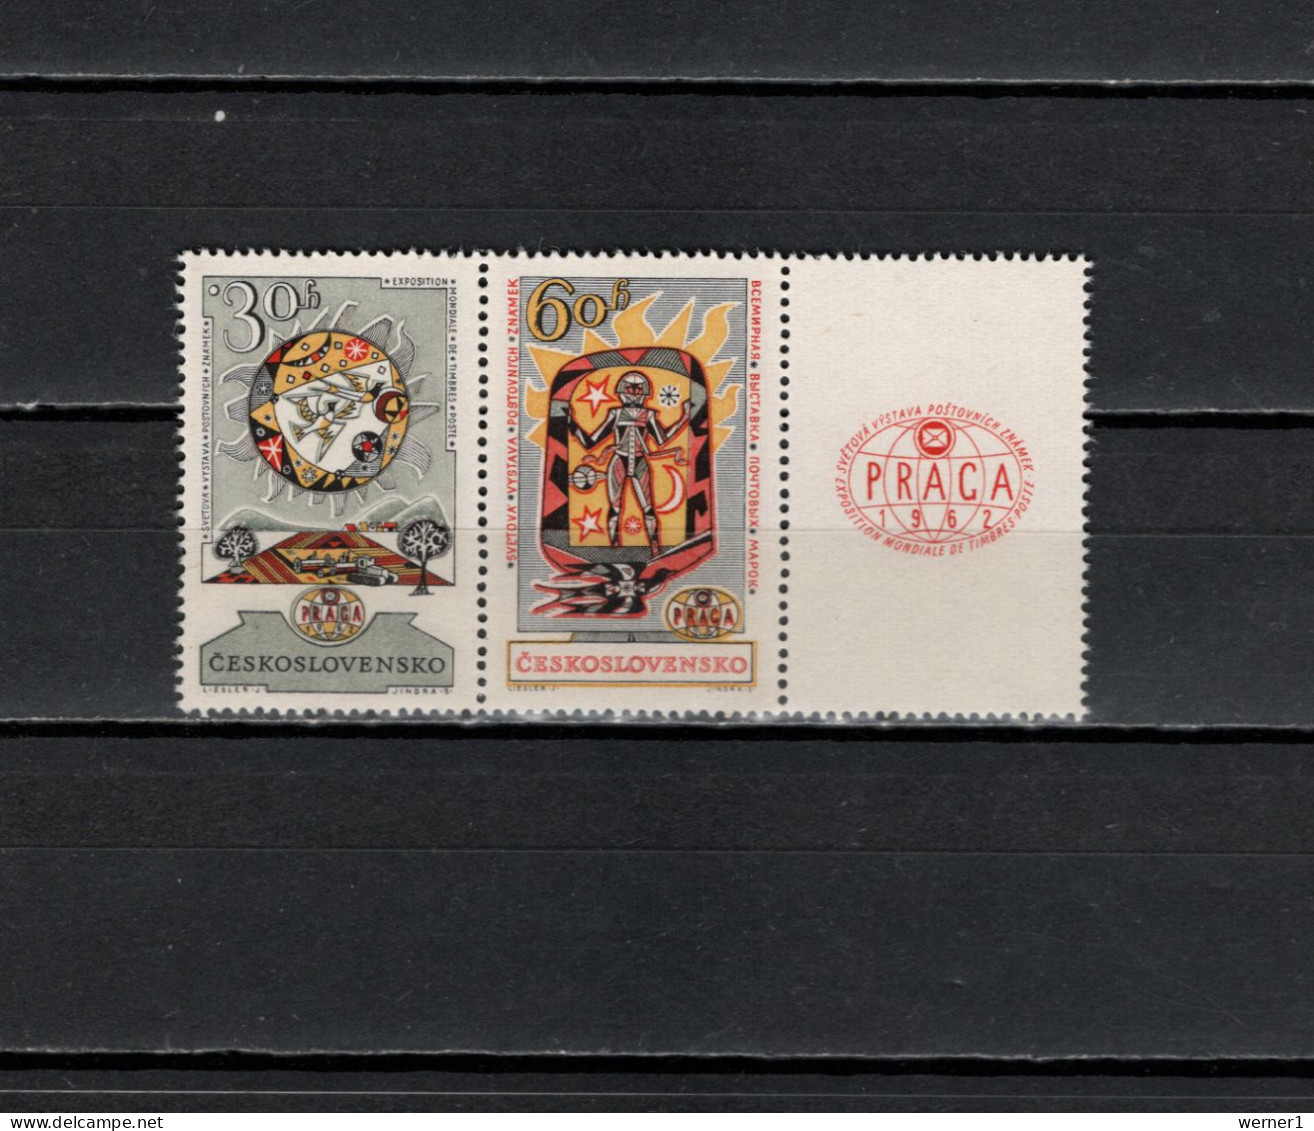 Czechoslovakia 1962 Space, Praga '62, 2 Stamps With Labels MNH - Europe